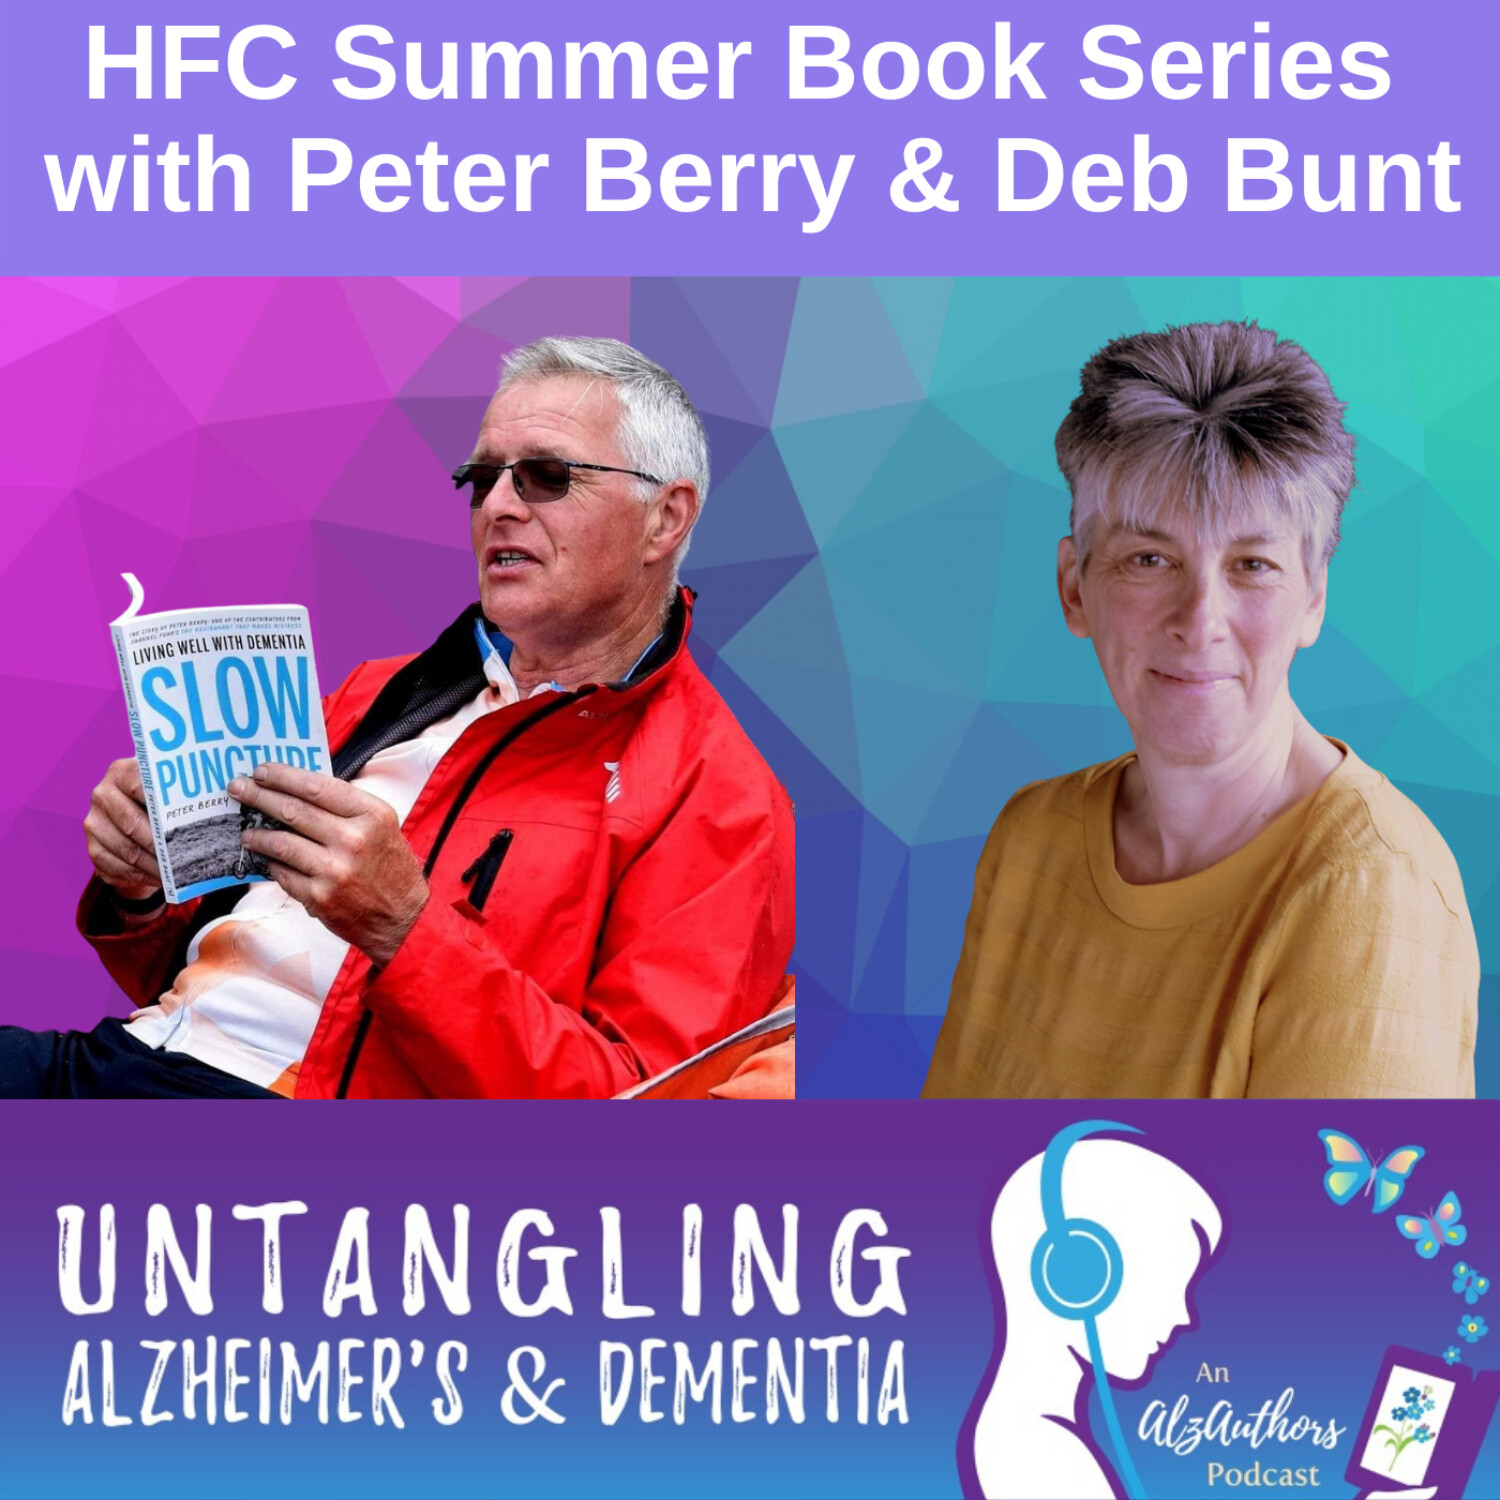 HFC and AlzAuthors Present an Author Talk with Peter Berry and Deb Bunt, authors of Slow Puncture: Living Well With Dementia